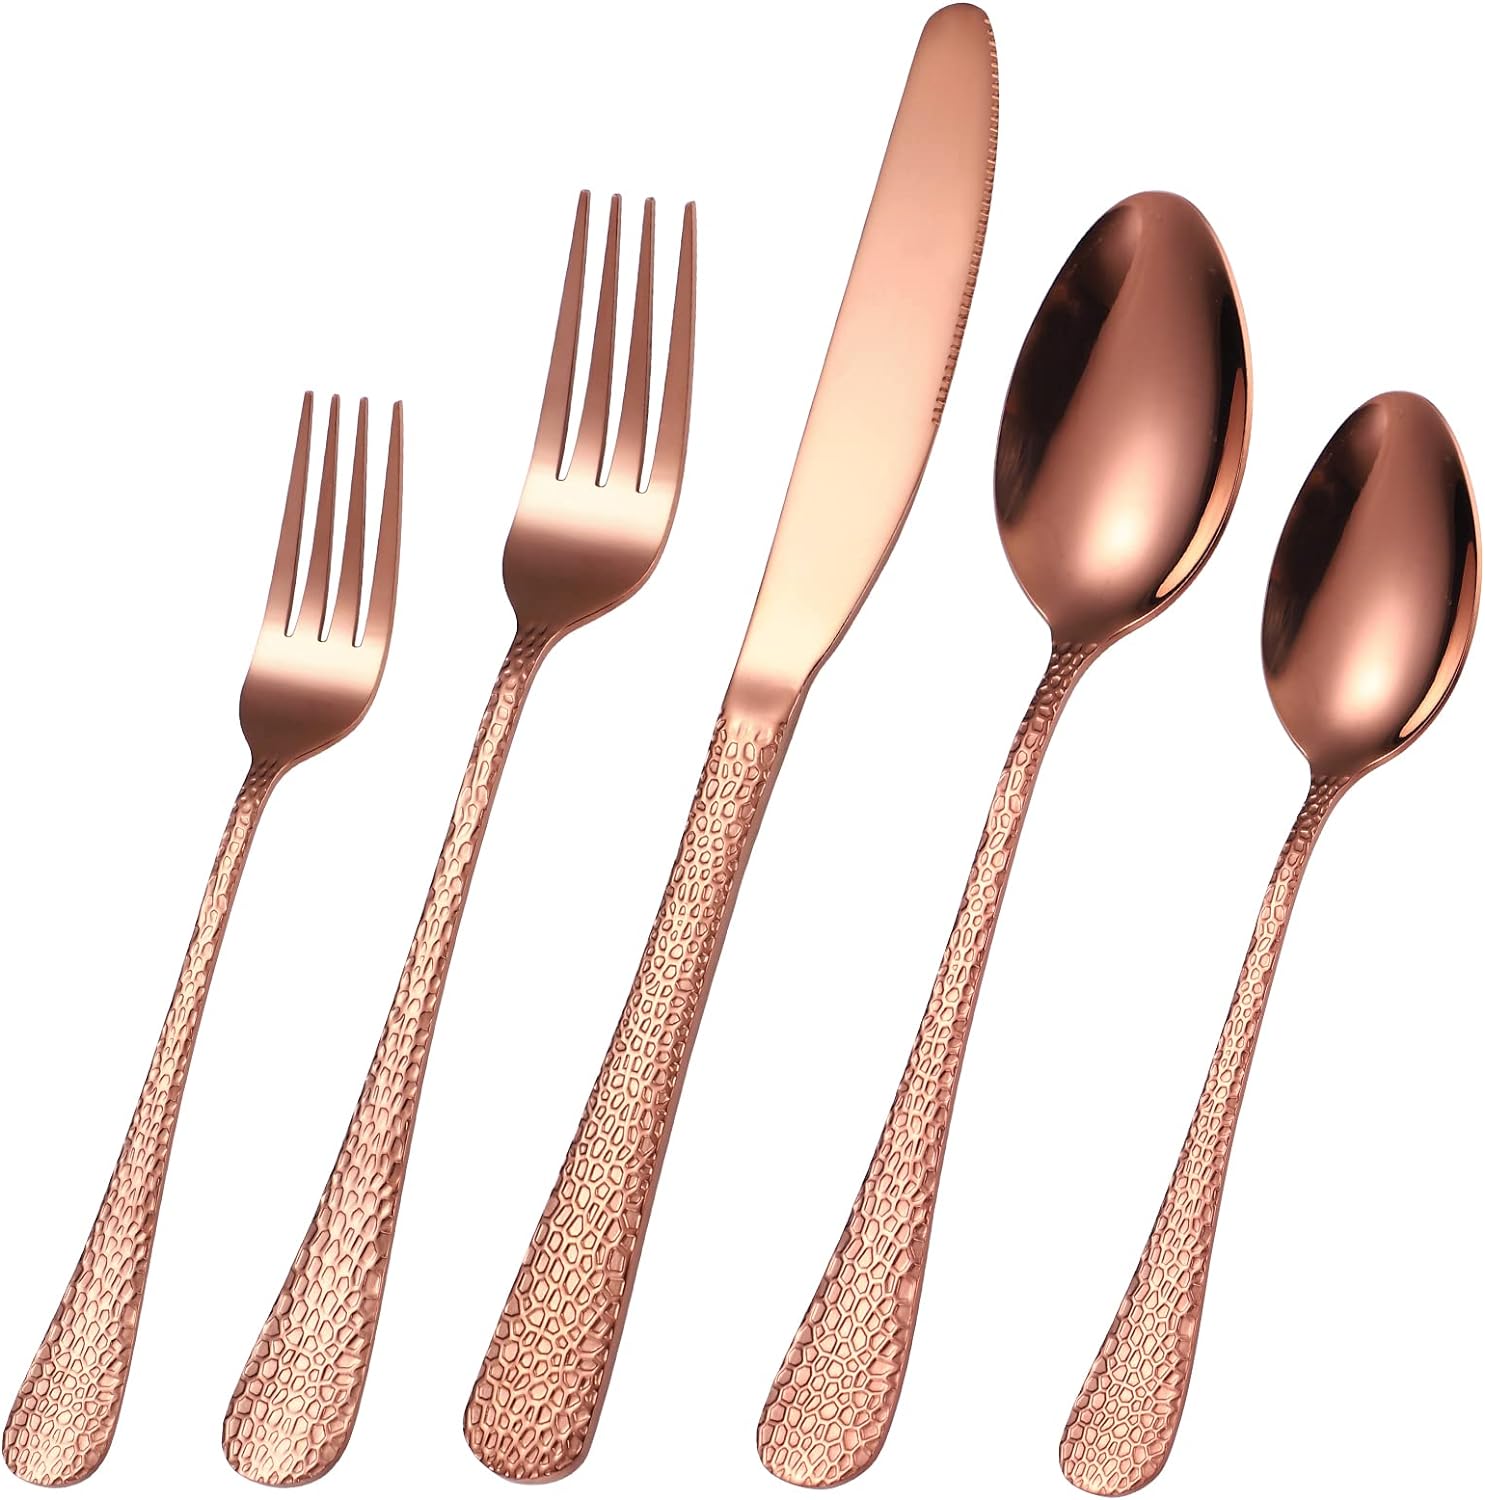 A · HOUSEWARE Copper Hammered Silverware Set Service for 8,40 Piece Flatware Stainless Steel,include Knives Forks Spoons Creative Handle Proper Weight Dishwasher Safe Perfect for Parties Daily Us